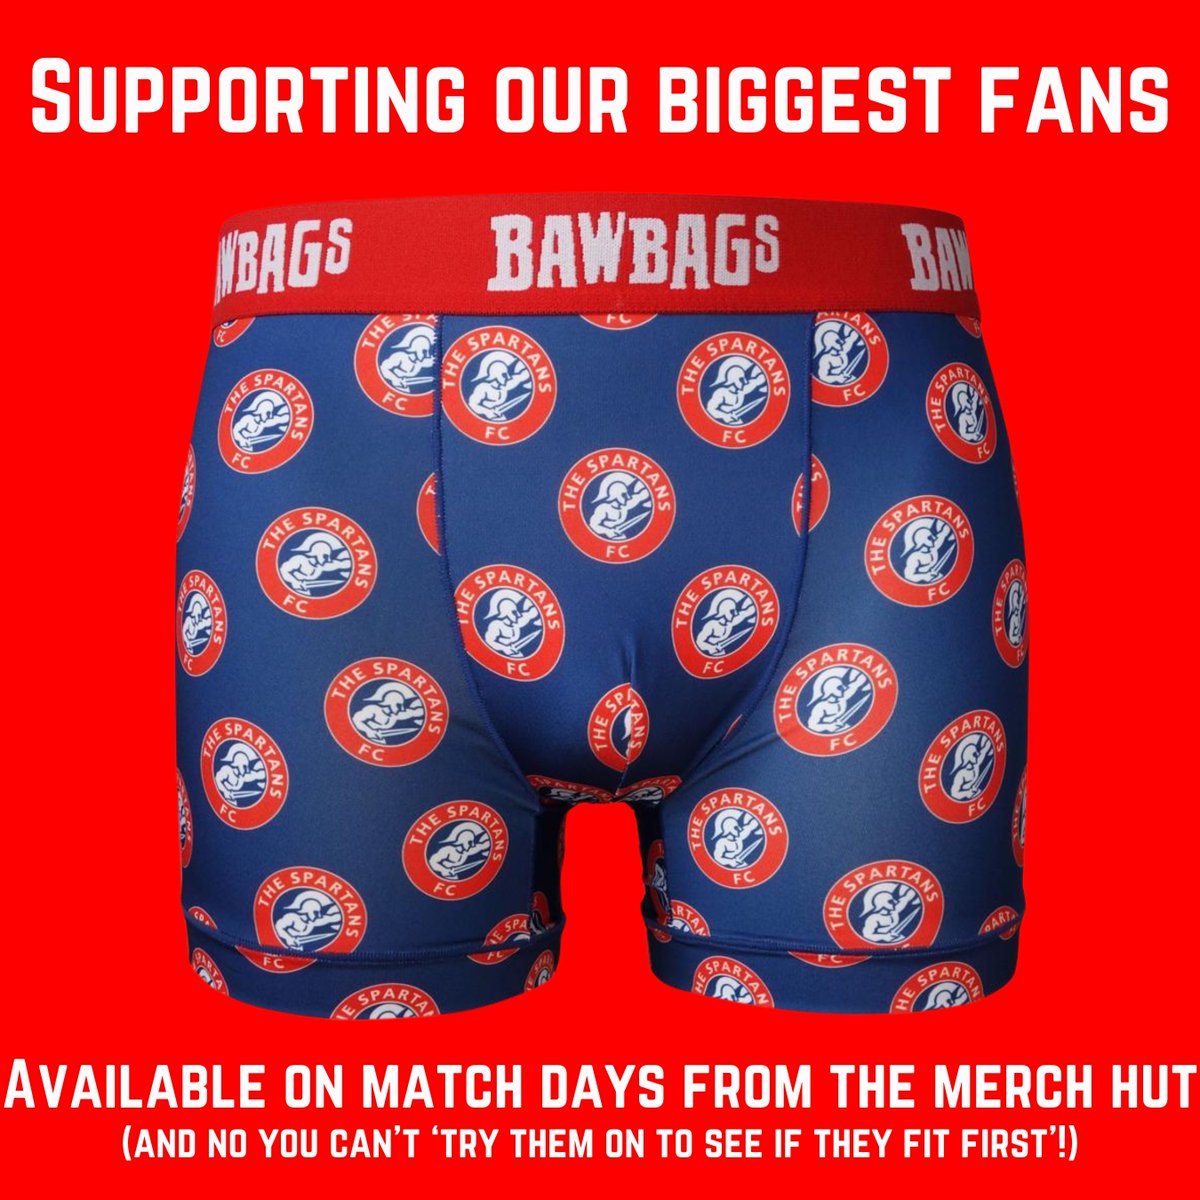 🩲 Whatever the size of your @Bawbags, we've got you covered. Spartans branded underwear available to purchase on Saturday at our merch hut.